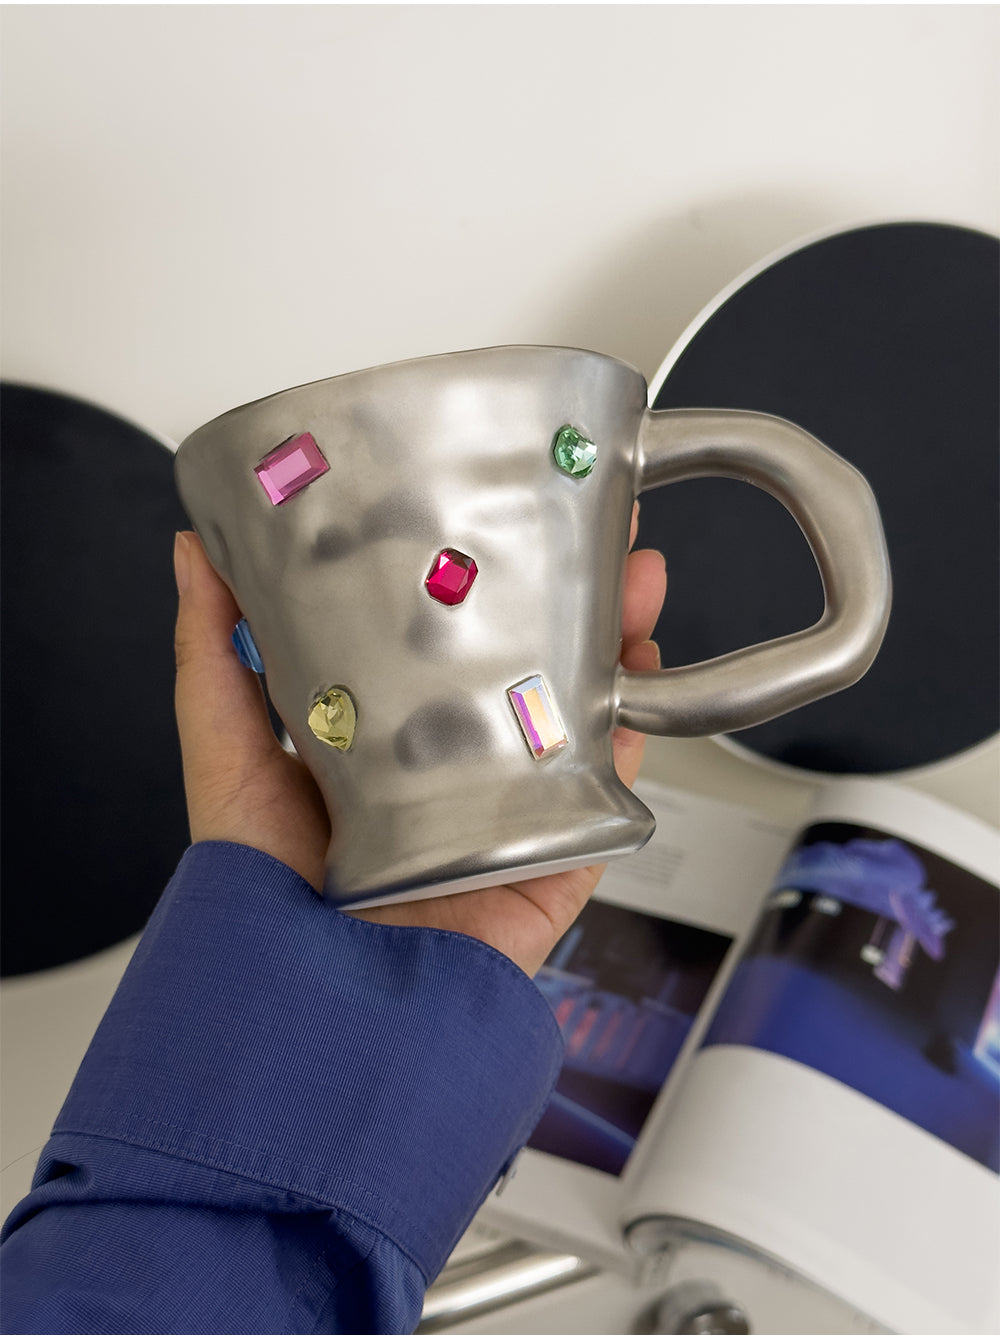 Luxury jewelry coffee mug with sense of future gems party, made of ceramic and crystal diamond, by A Bit Sleepy homeware concept store